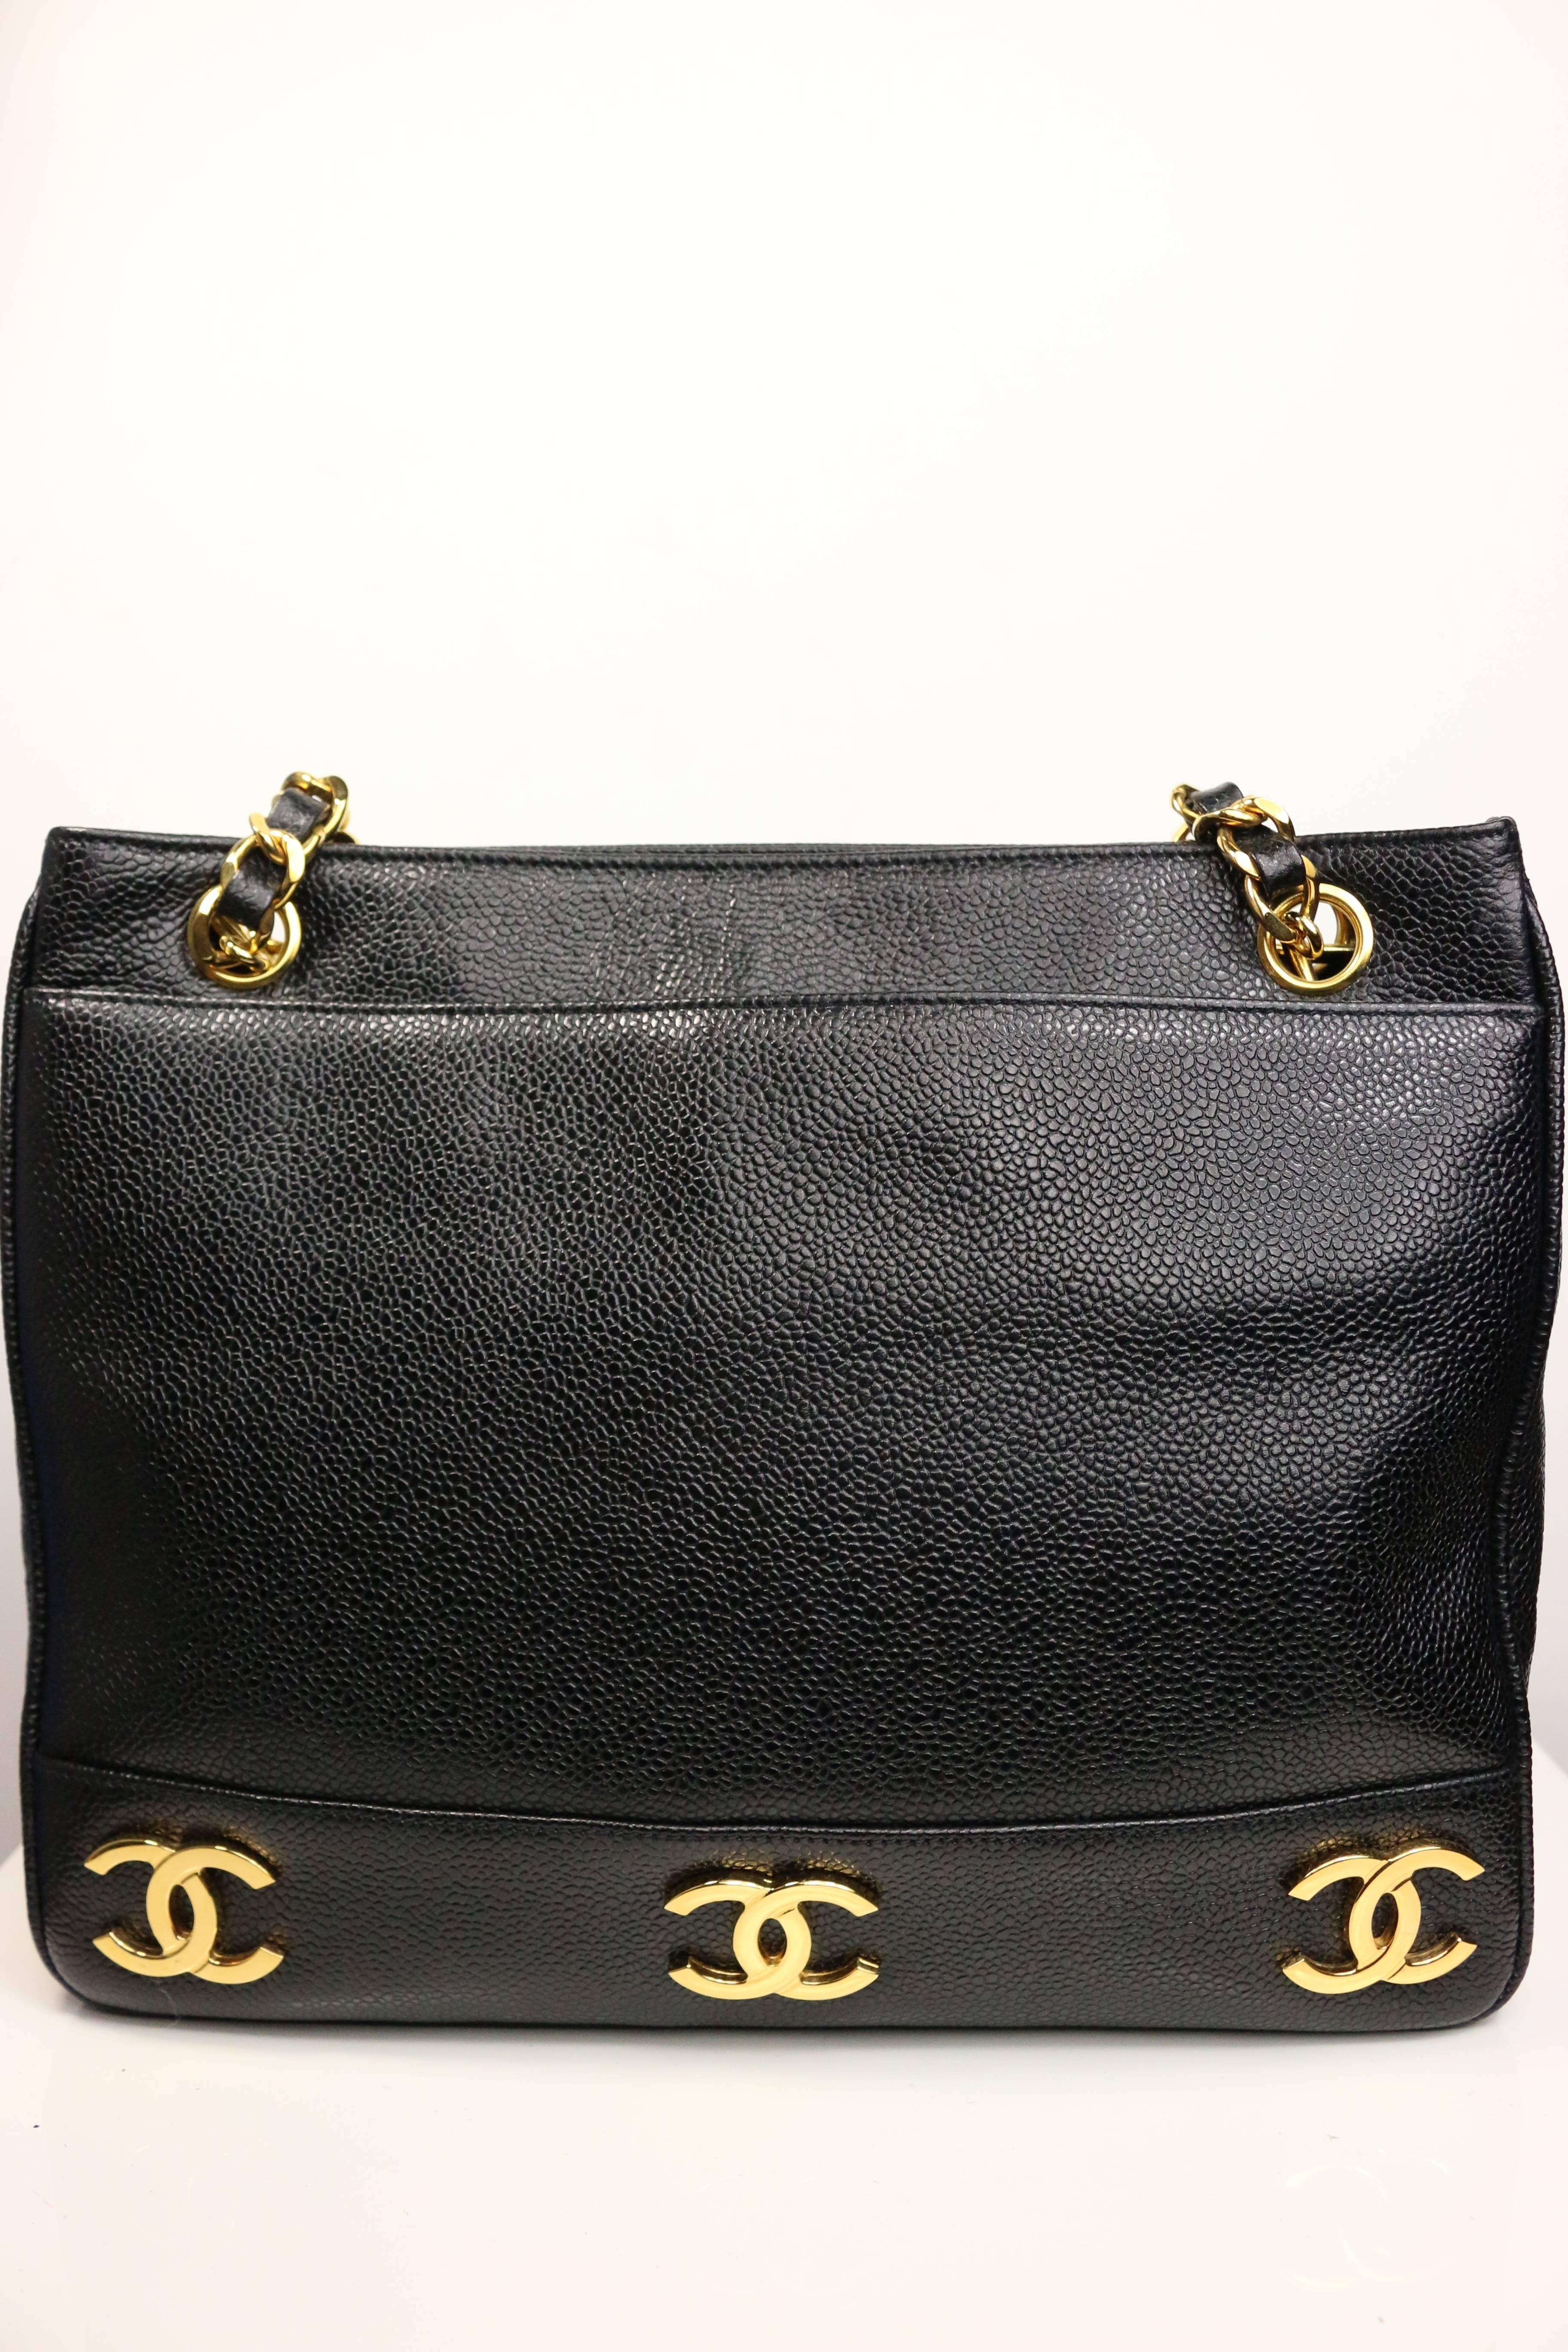 - Chanel black caviar leather gold "CC" logo shopping tote from early 90s collection. Its a black and gold Chanel classic and vintage bag combination! 

- Featuring gold hardware caviar leather strap and eight gold "CC" logo on